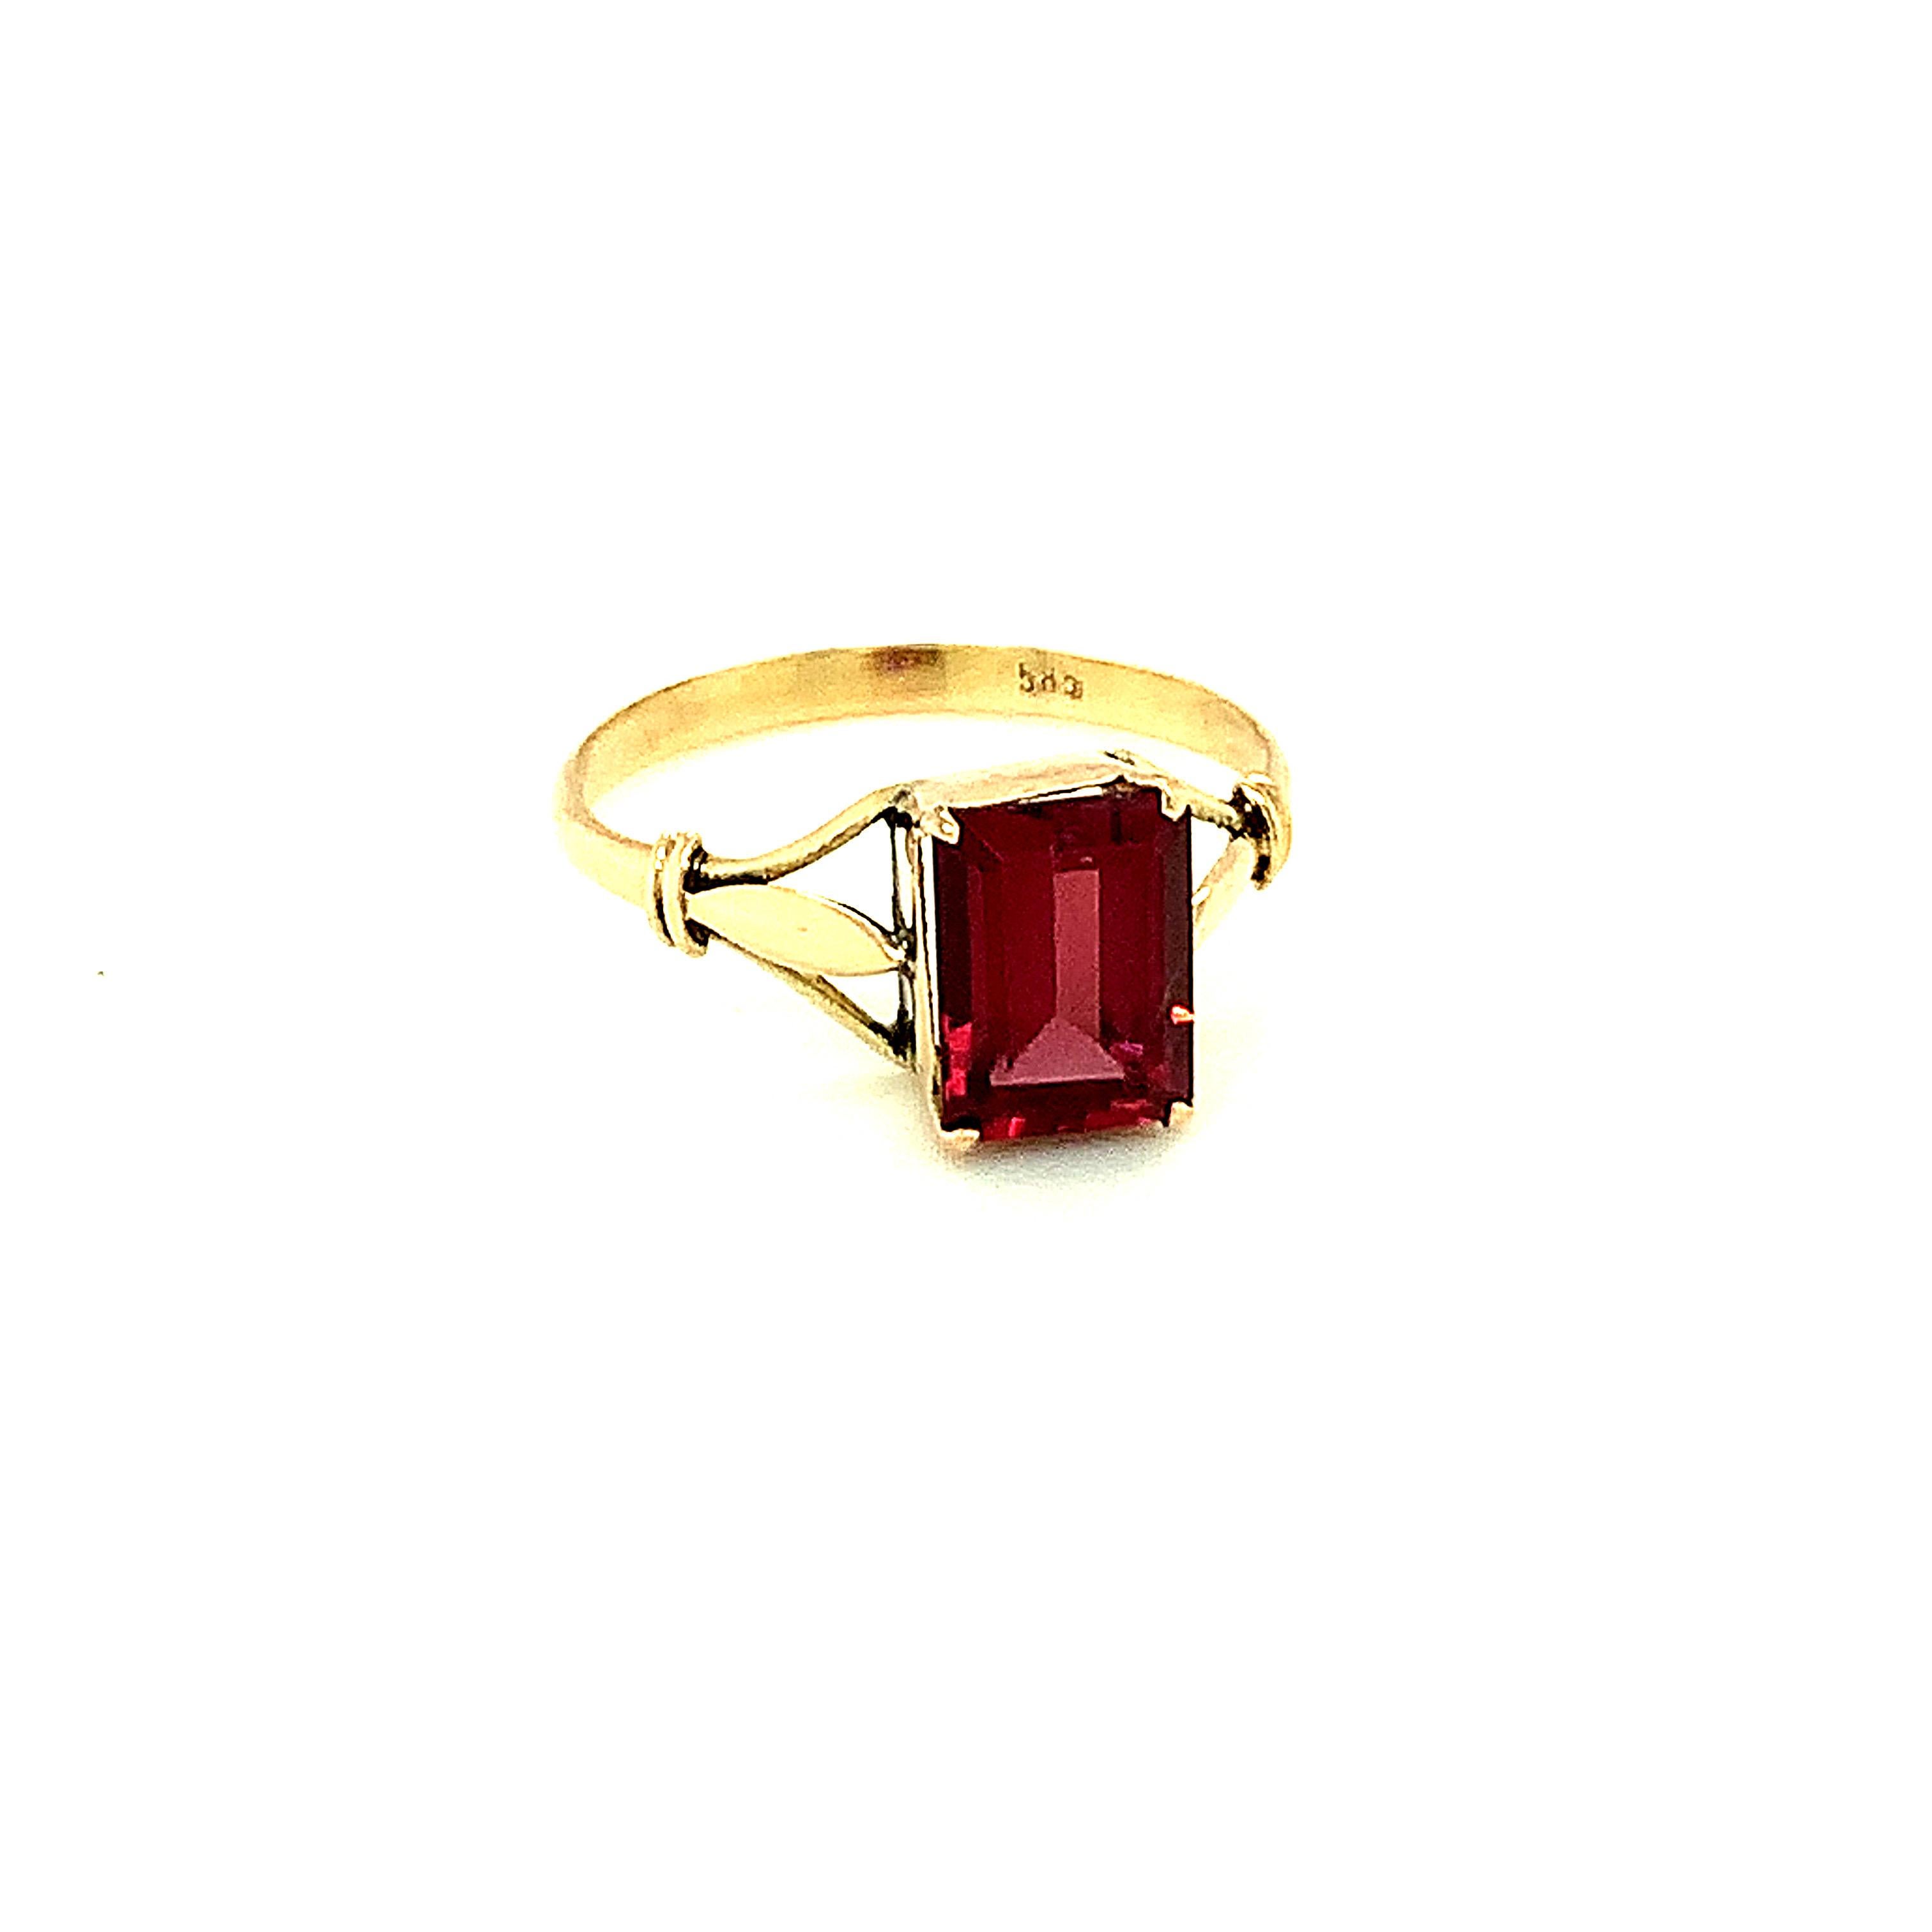 This Baguette cut garnet ring is set in 14K yellow gold. 
It is simple and chic and perfect for daily use
Hand crafted 
Ethically sourced natural gem stone